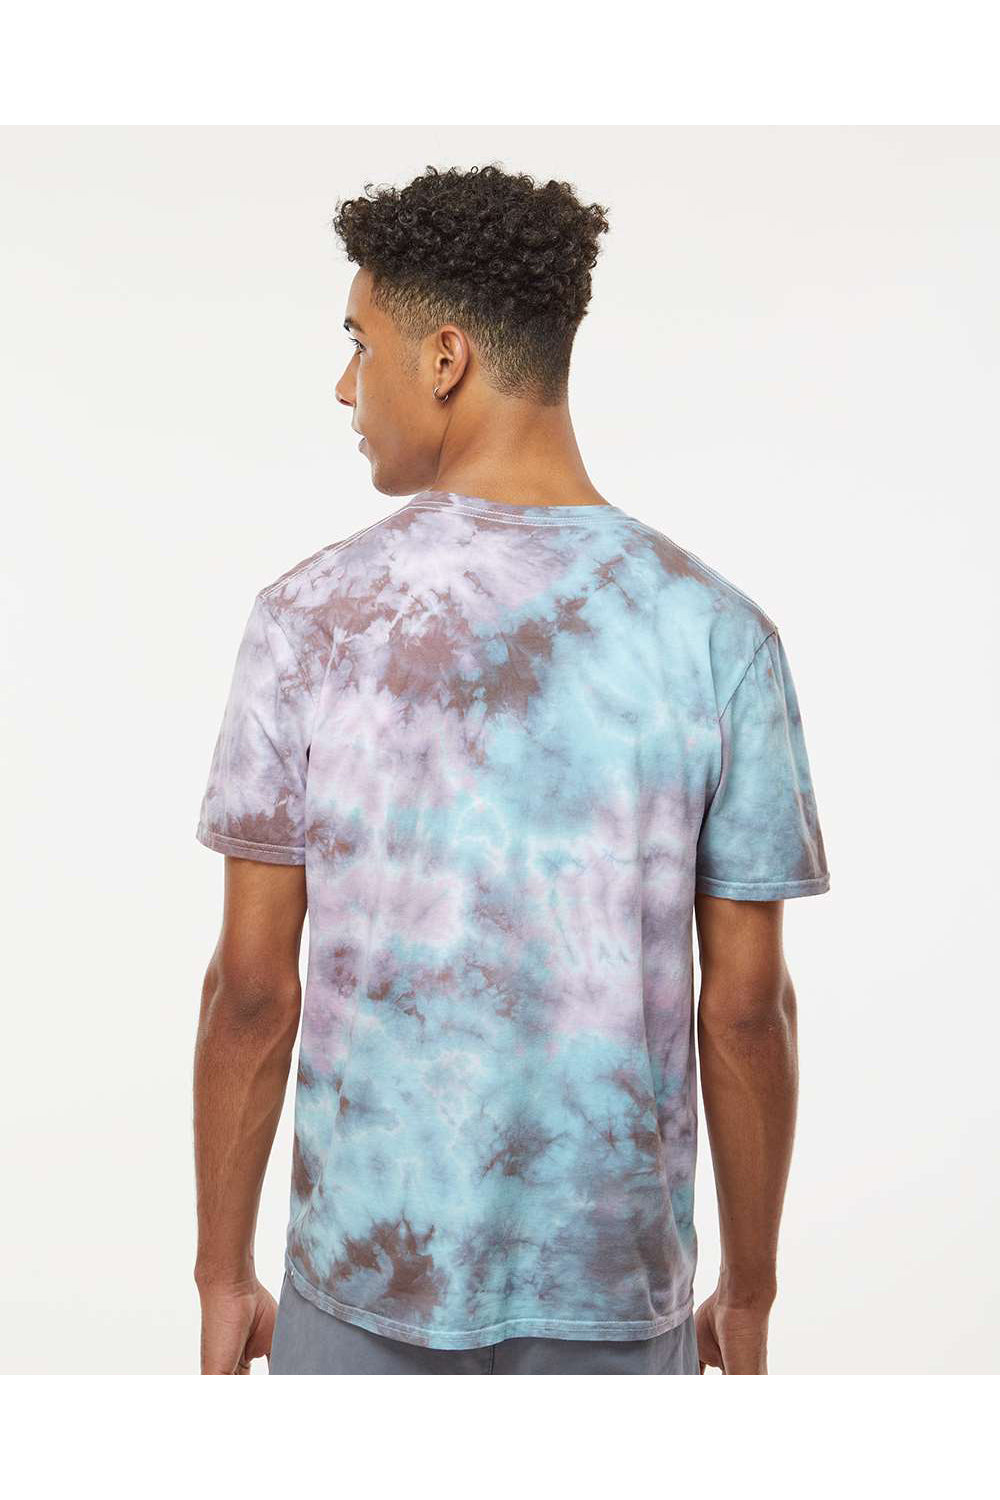 Dyenomite 640LM Mens LaMer Over Dyed Crinkle Tie Dyed Short Sleeve Crewneck T-Shirt Pacific Model Back